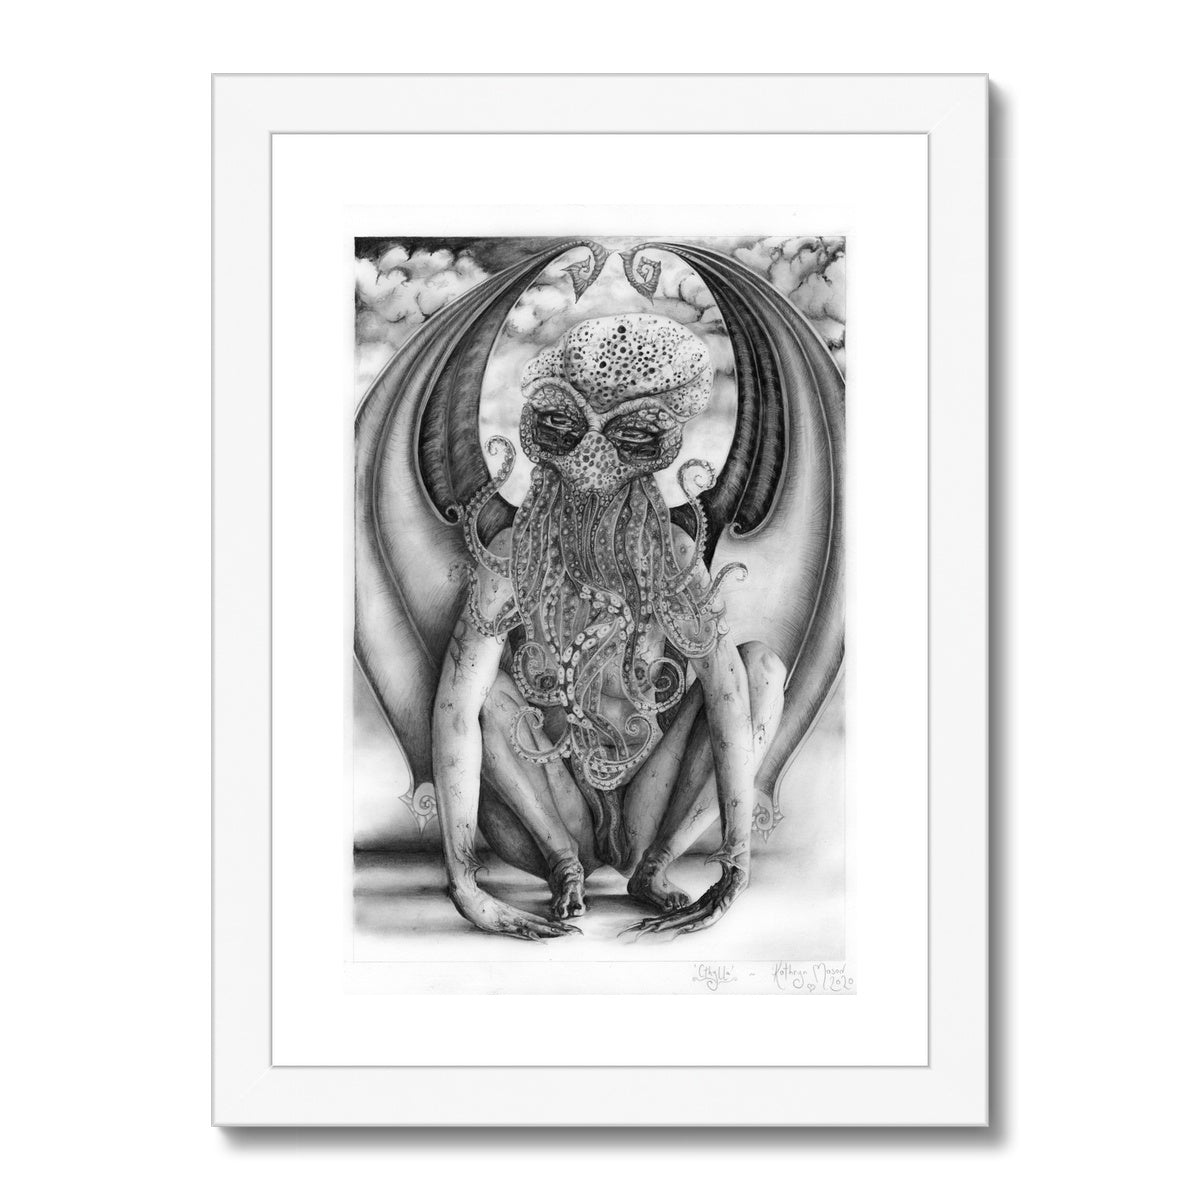 'Cthylla - Daughter of Cthulhu' Framed & Mounted Print